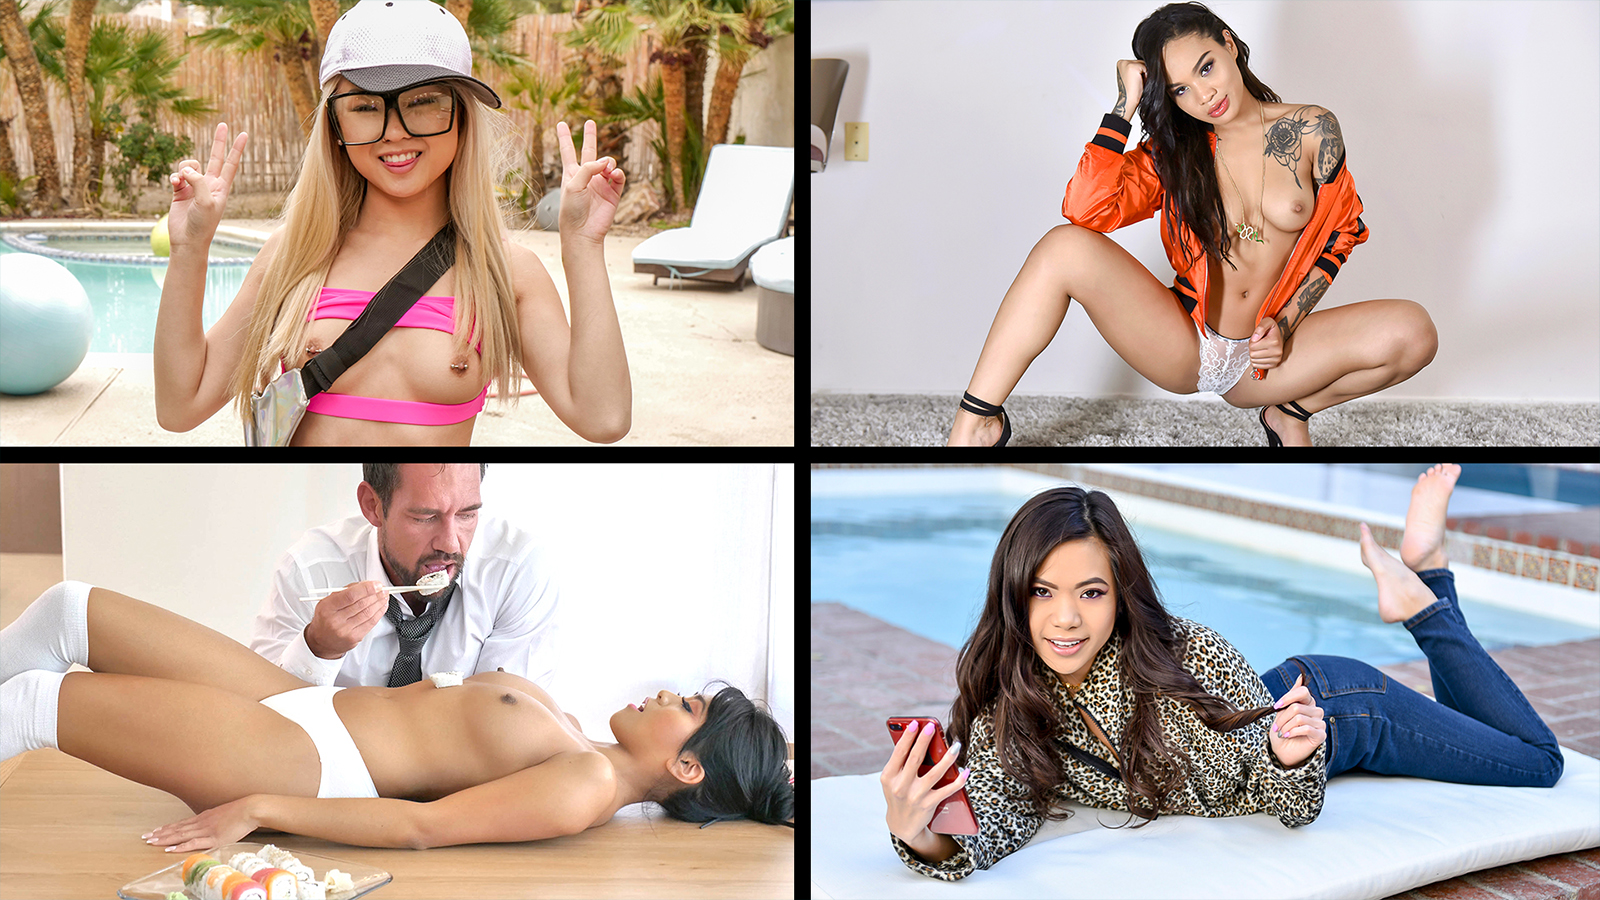 Team Skeet Selects - Little Asian Cuties Compilation [1080p] - Cover